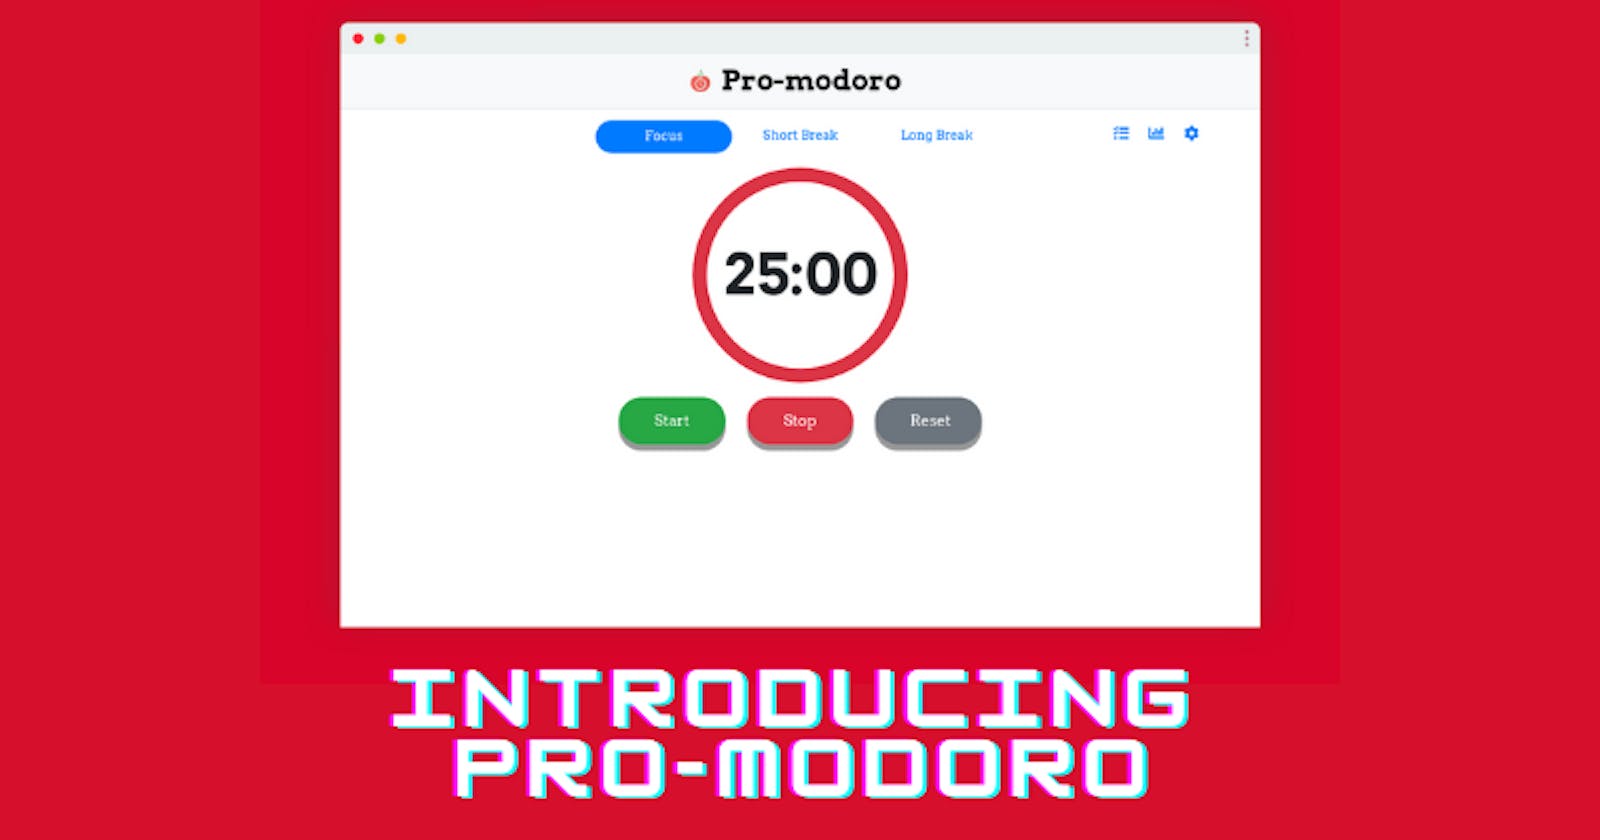 Introducing Pro-modoro: Your ultimate productivity station.